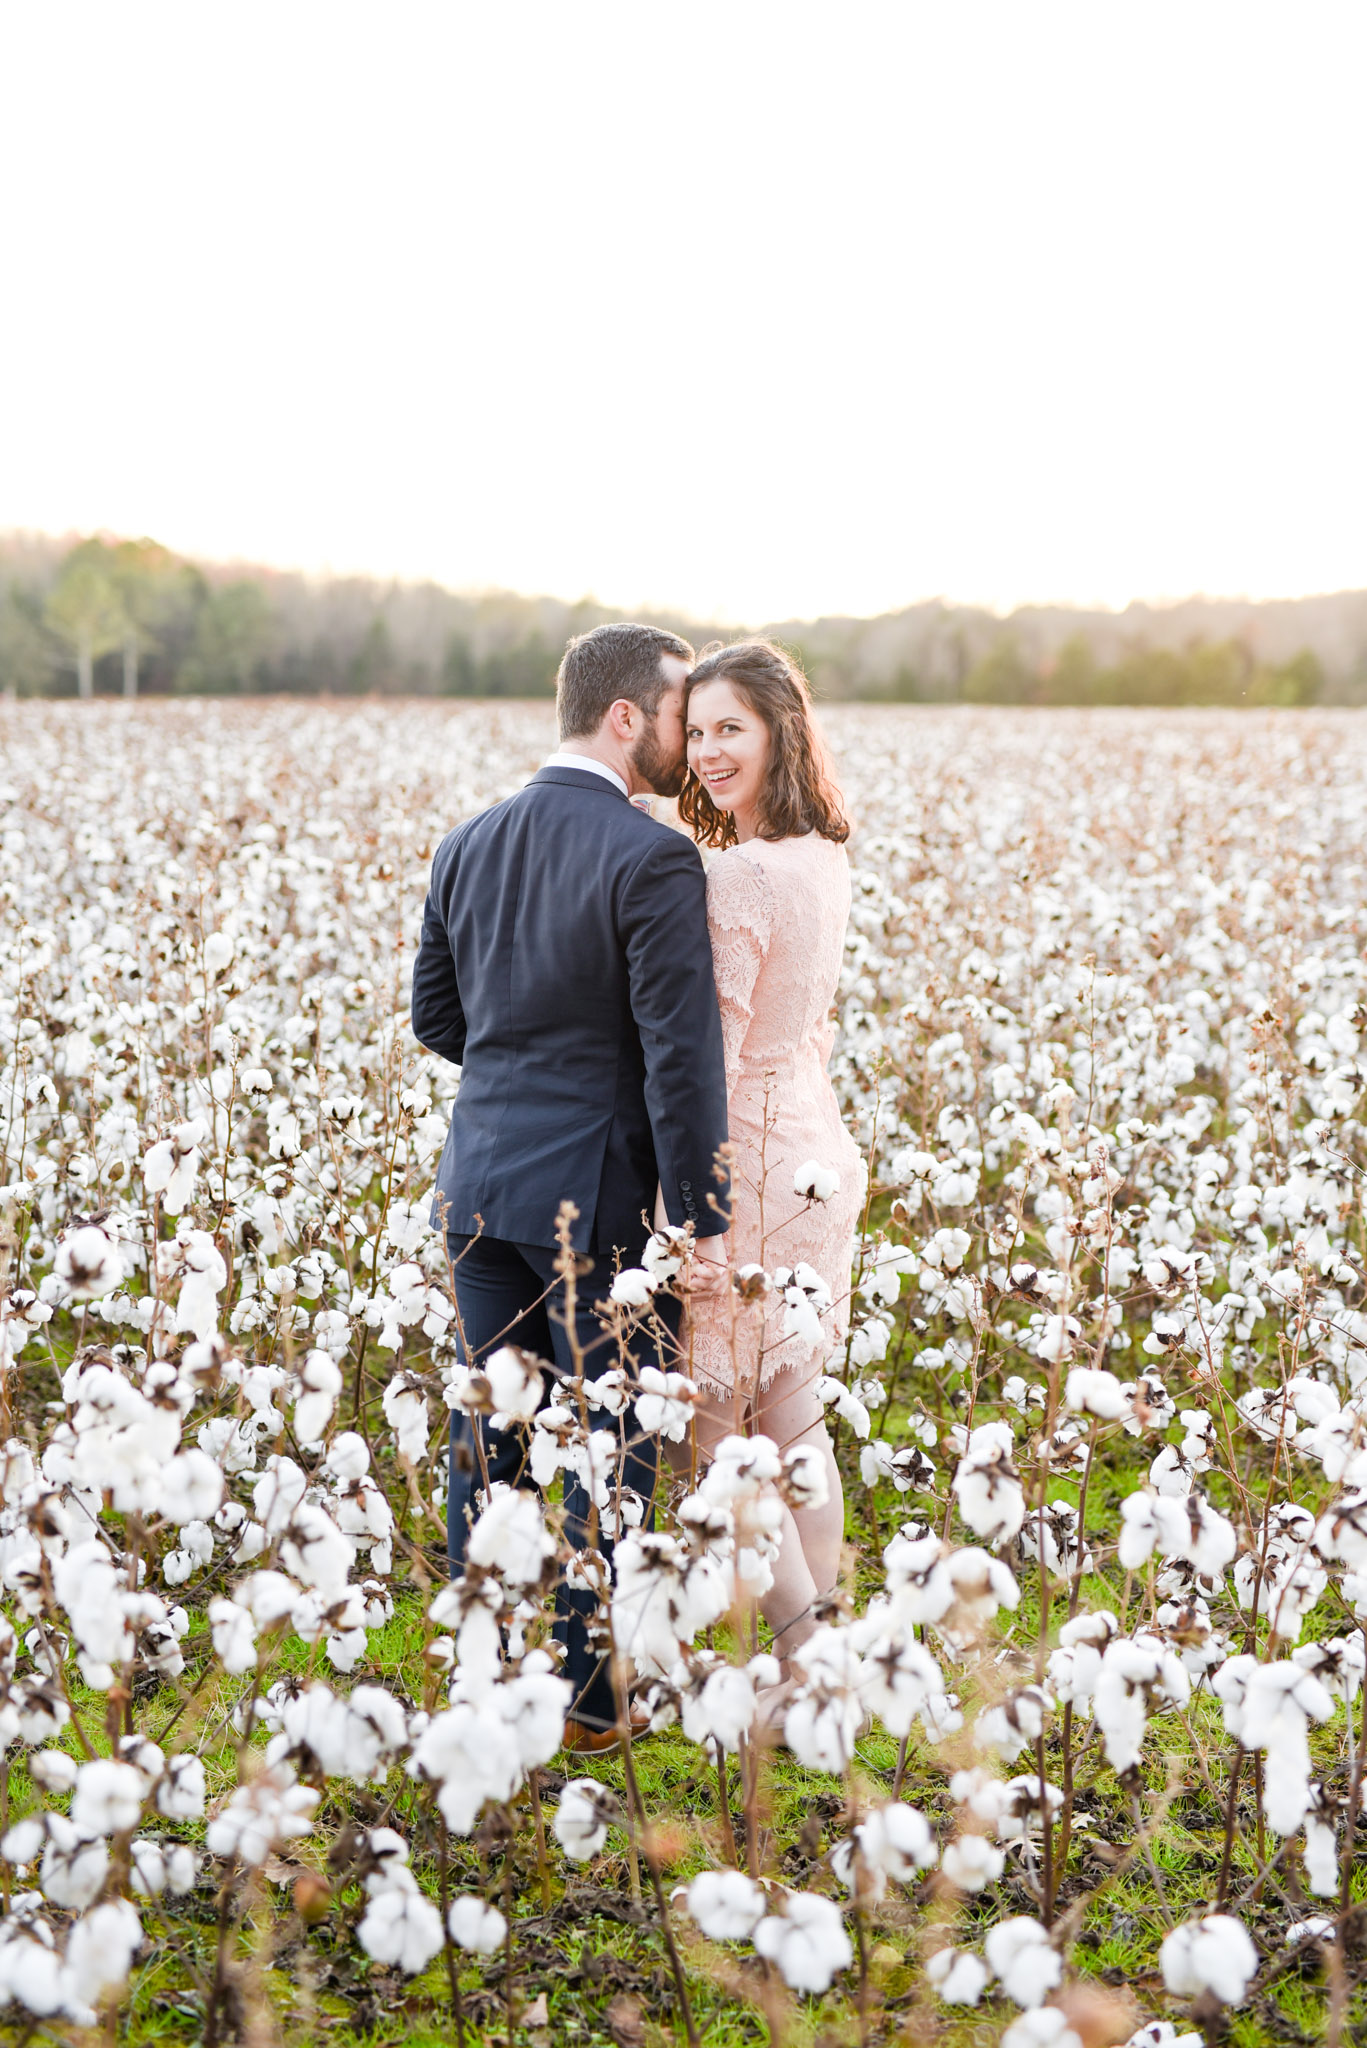 Woman smiles while holding hands with husband in cotton field.